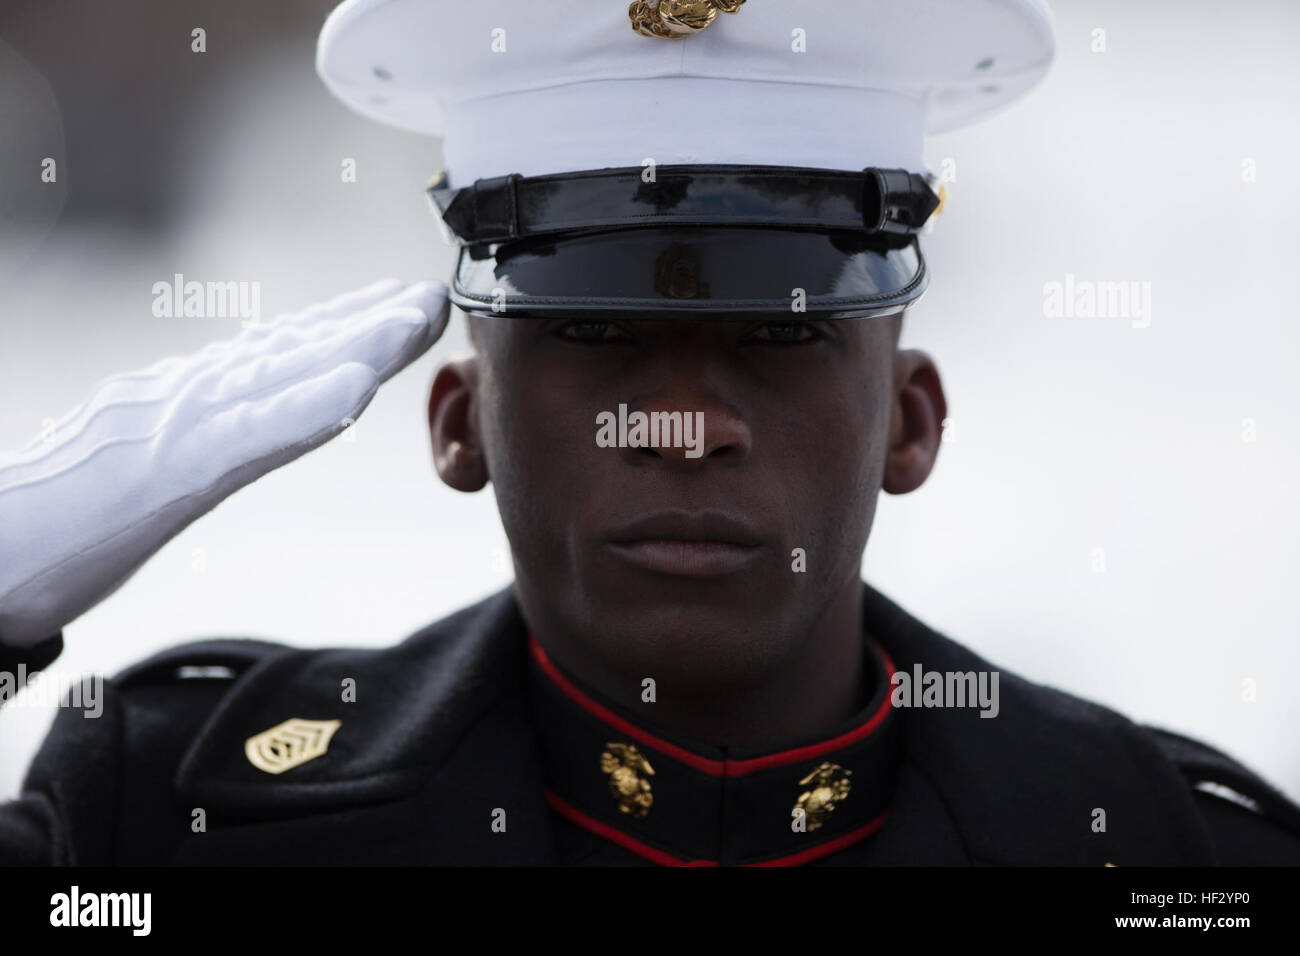 A Marine salutes the American flag during a wreath laying ceremony at the Marine Corps War Memorial in Washington. The ceremony commemorated the 70th anniversary of the battle for Iwo Jima. With most of the surviving veterans in their 80’s and 90’s, surviving Marines visited the memorial in remembrance of their brothers in arms.  (U.S. Marine Corps photo by Cpl. Clayton Filiopwicz/Released) WWII Marine Veterans Remember Iwo Jima with Wreath Laying Ceremony 150219-M-LX723-002 Stock Photo